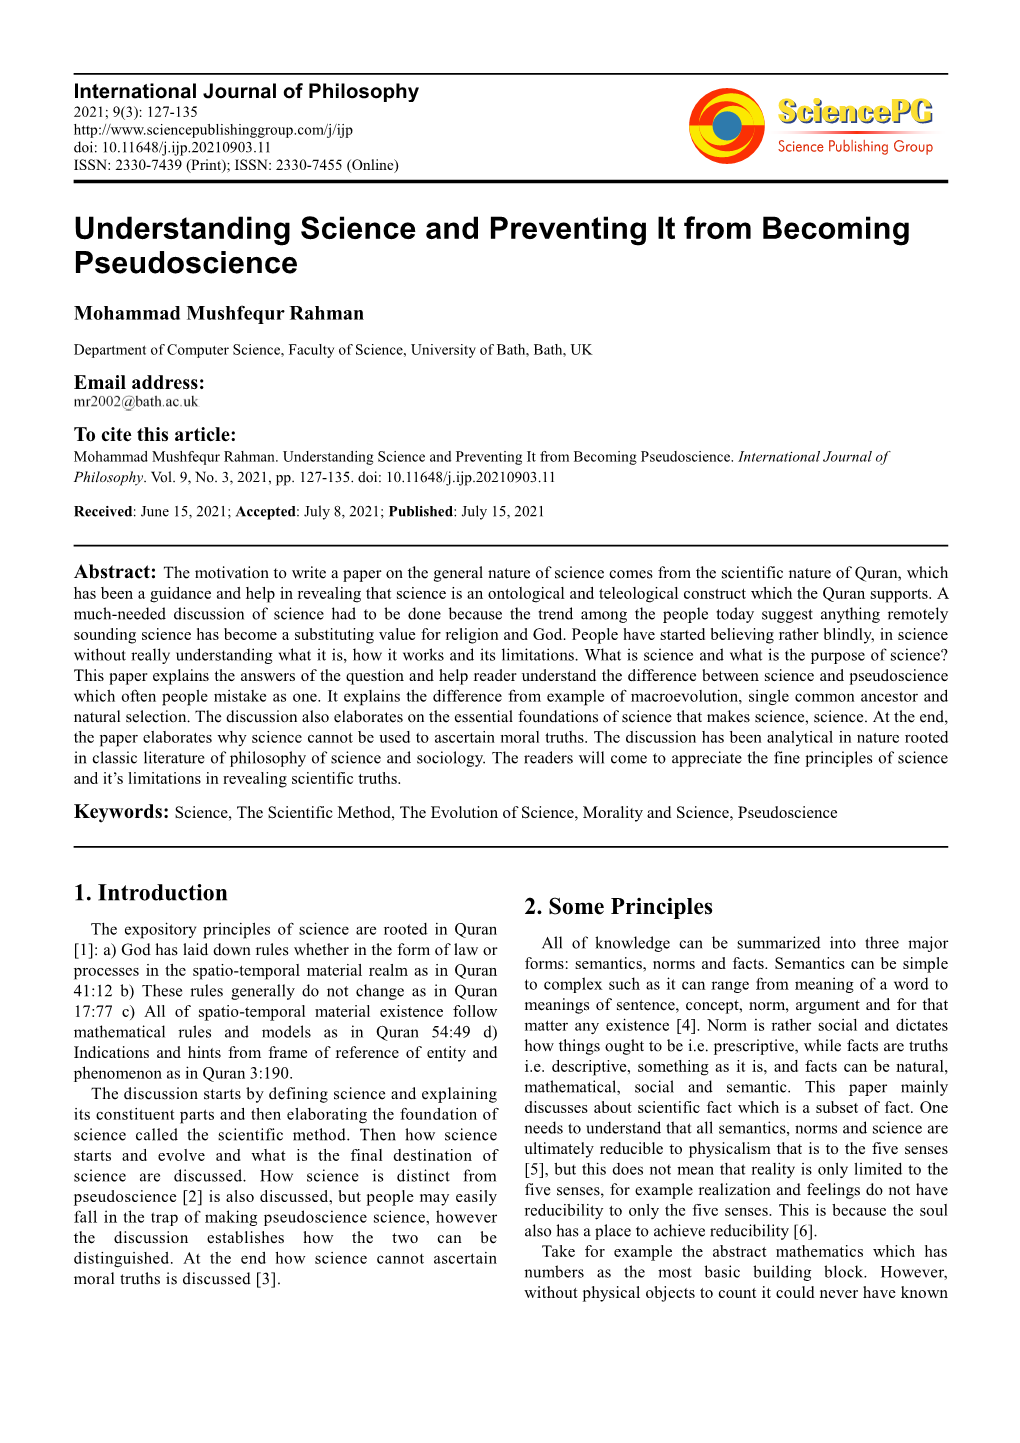 Understanding Science and Preventing It from Becoming Pseudoscience